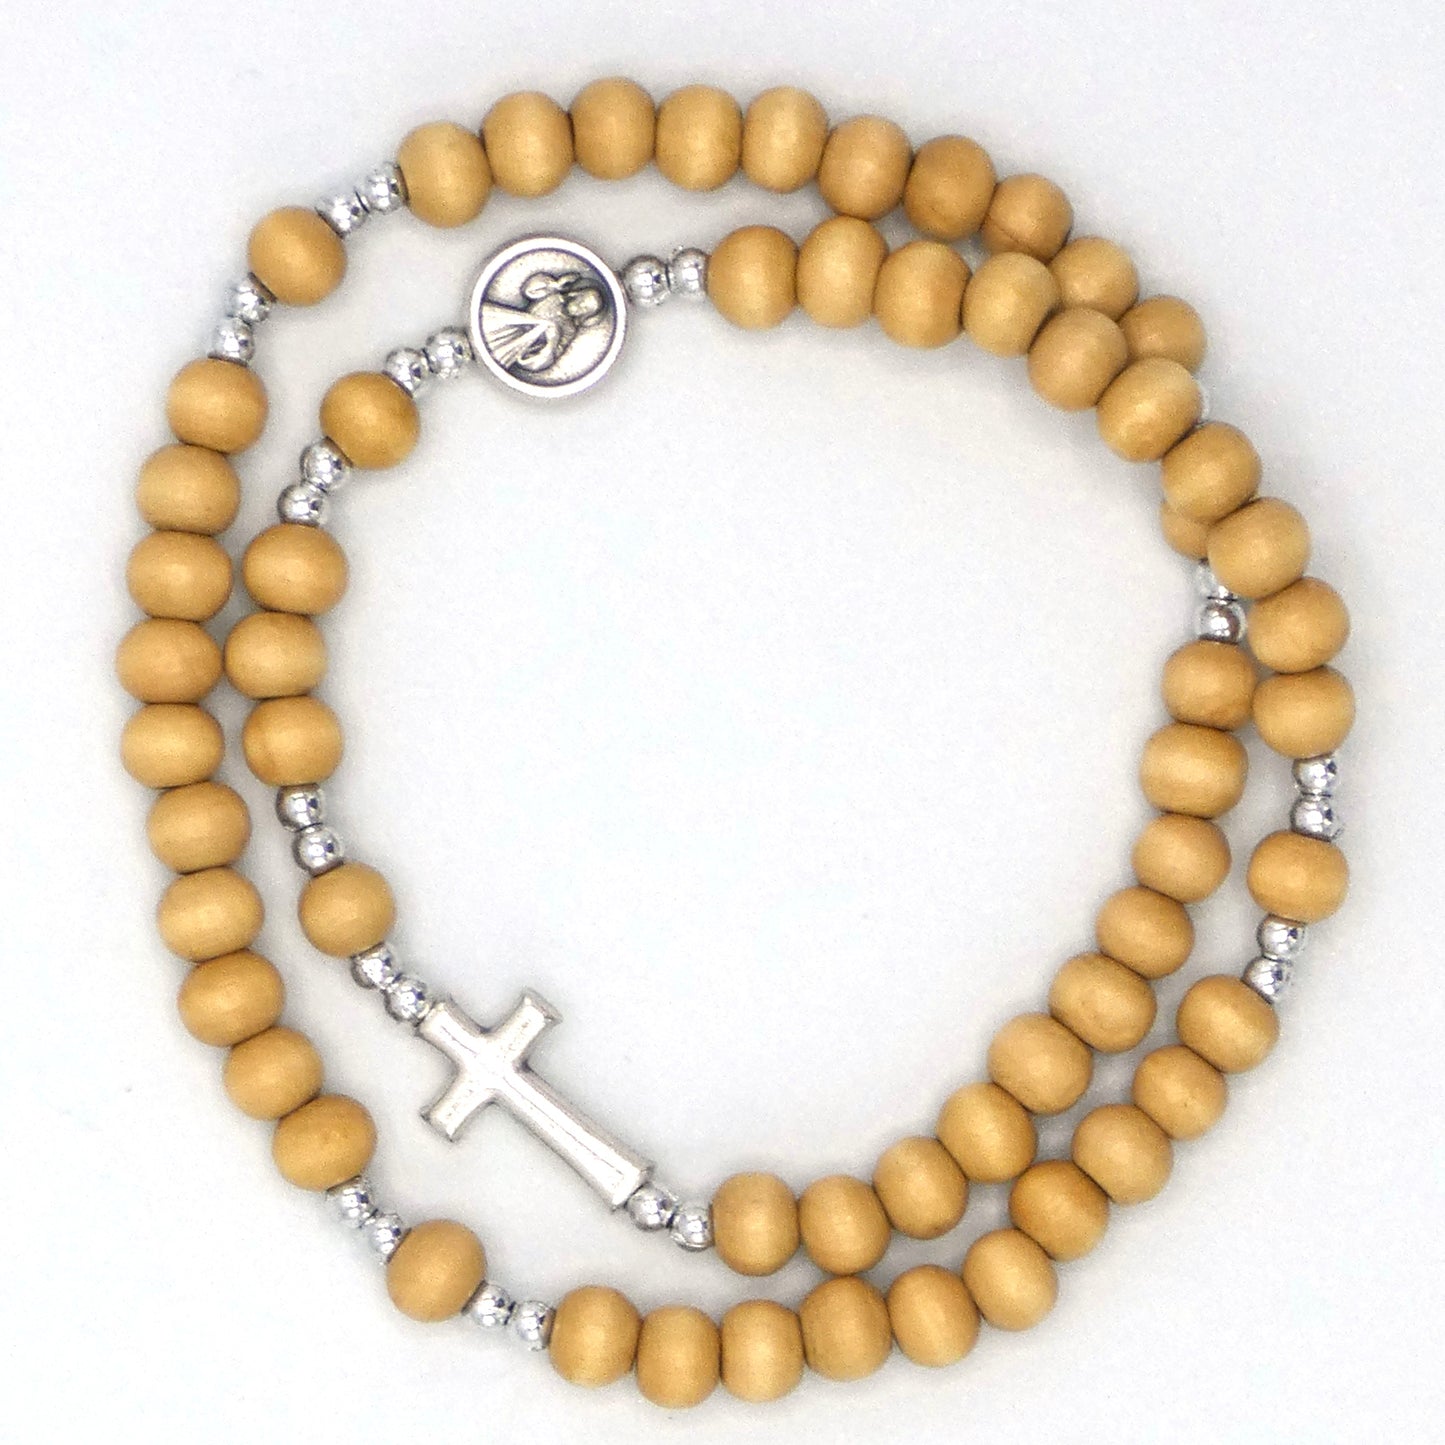 Wooden Wrap Rosary Bracelet of Assorted Colors